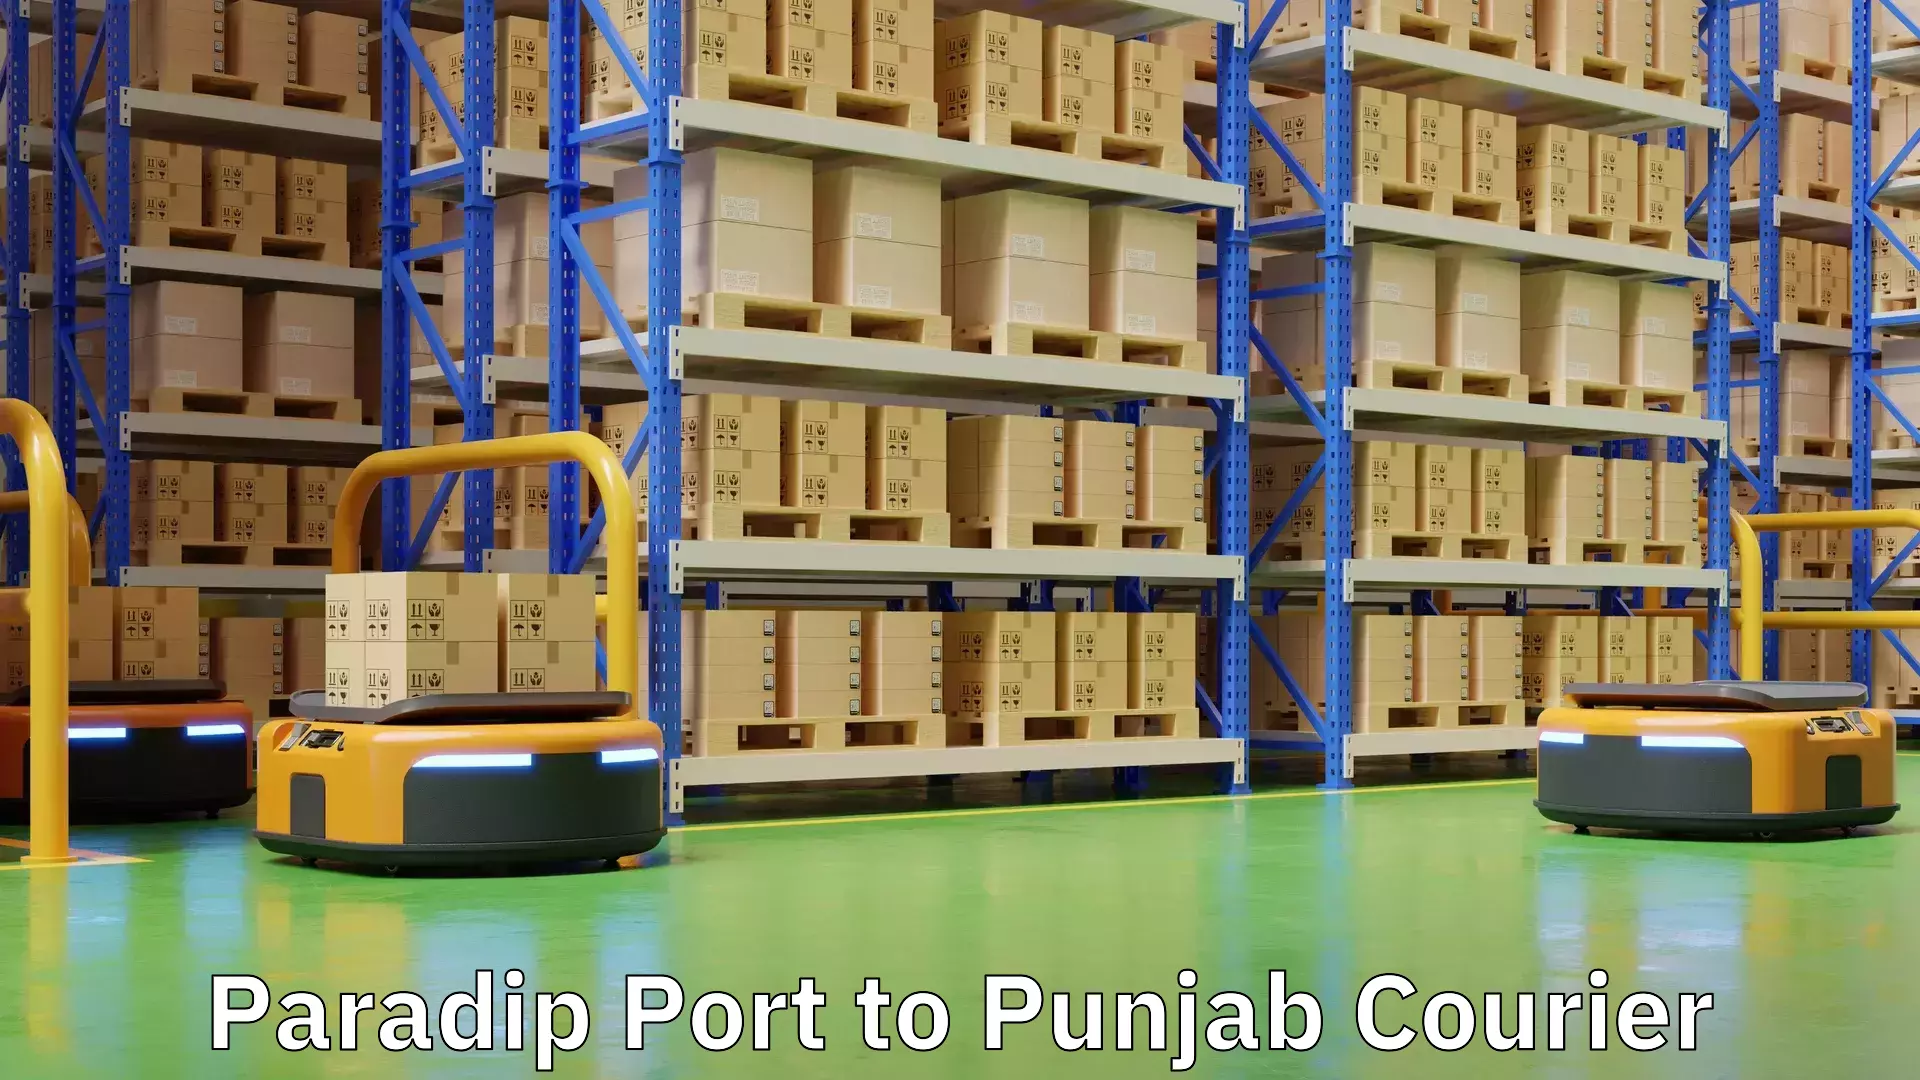 Multi-national courier services Paradip Port to Punjab